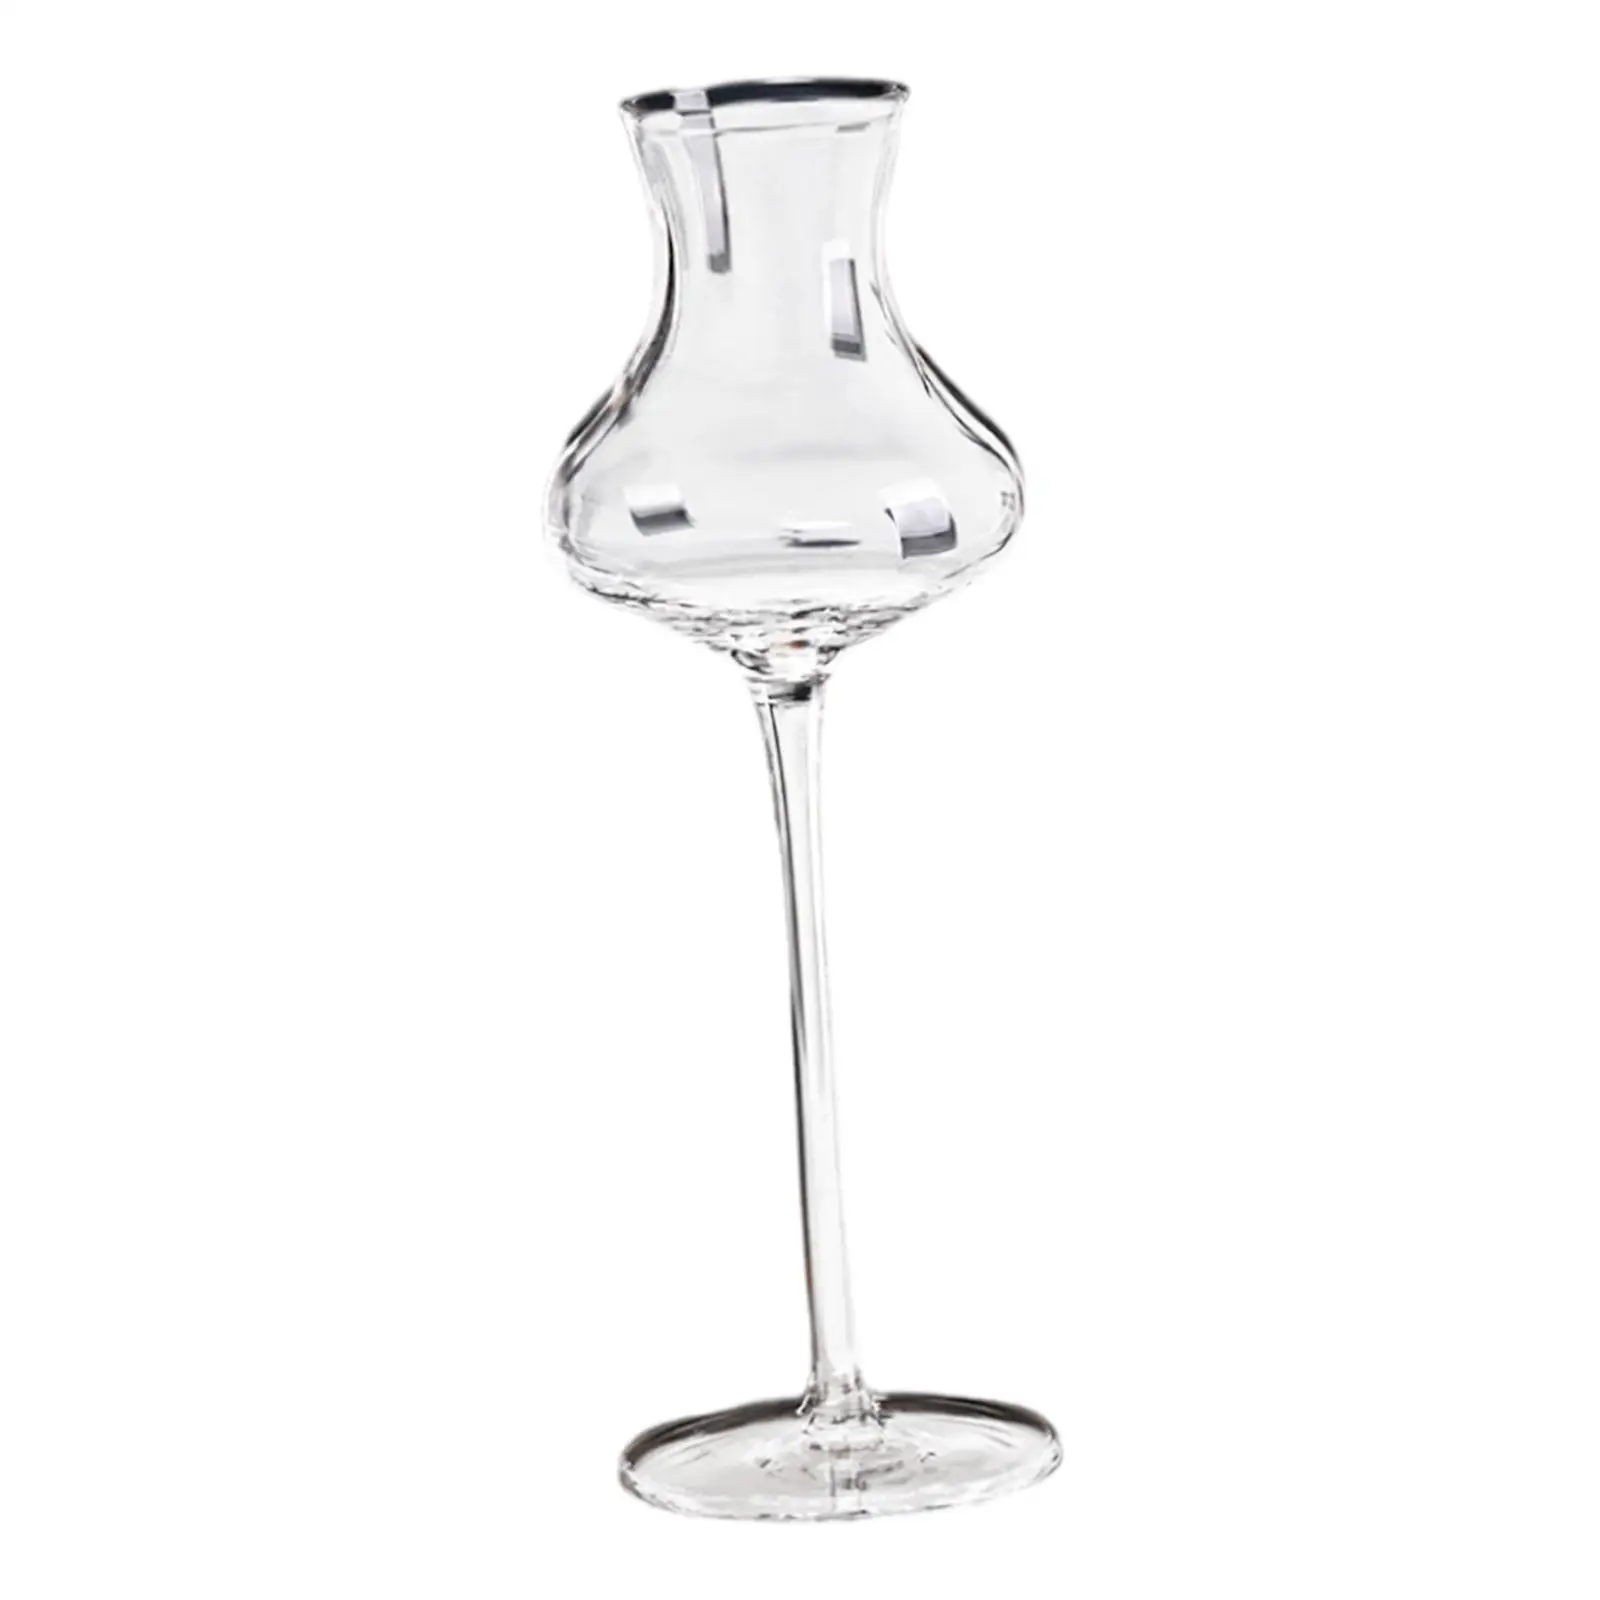 Glass Champagne Goblet Creative 130ml Wine Goblet Glasses for Gifts Anniversary Drinking KTV Bar Club Party Decoration